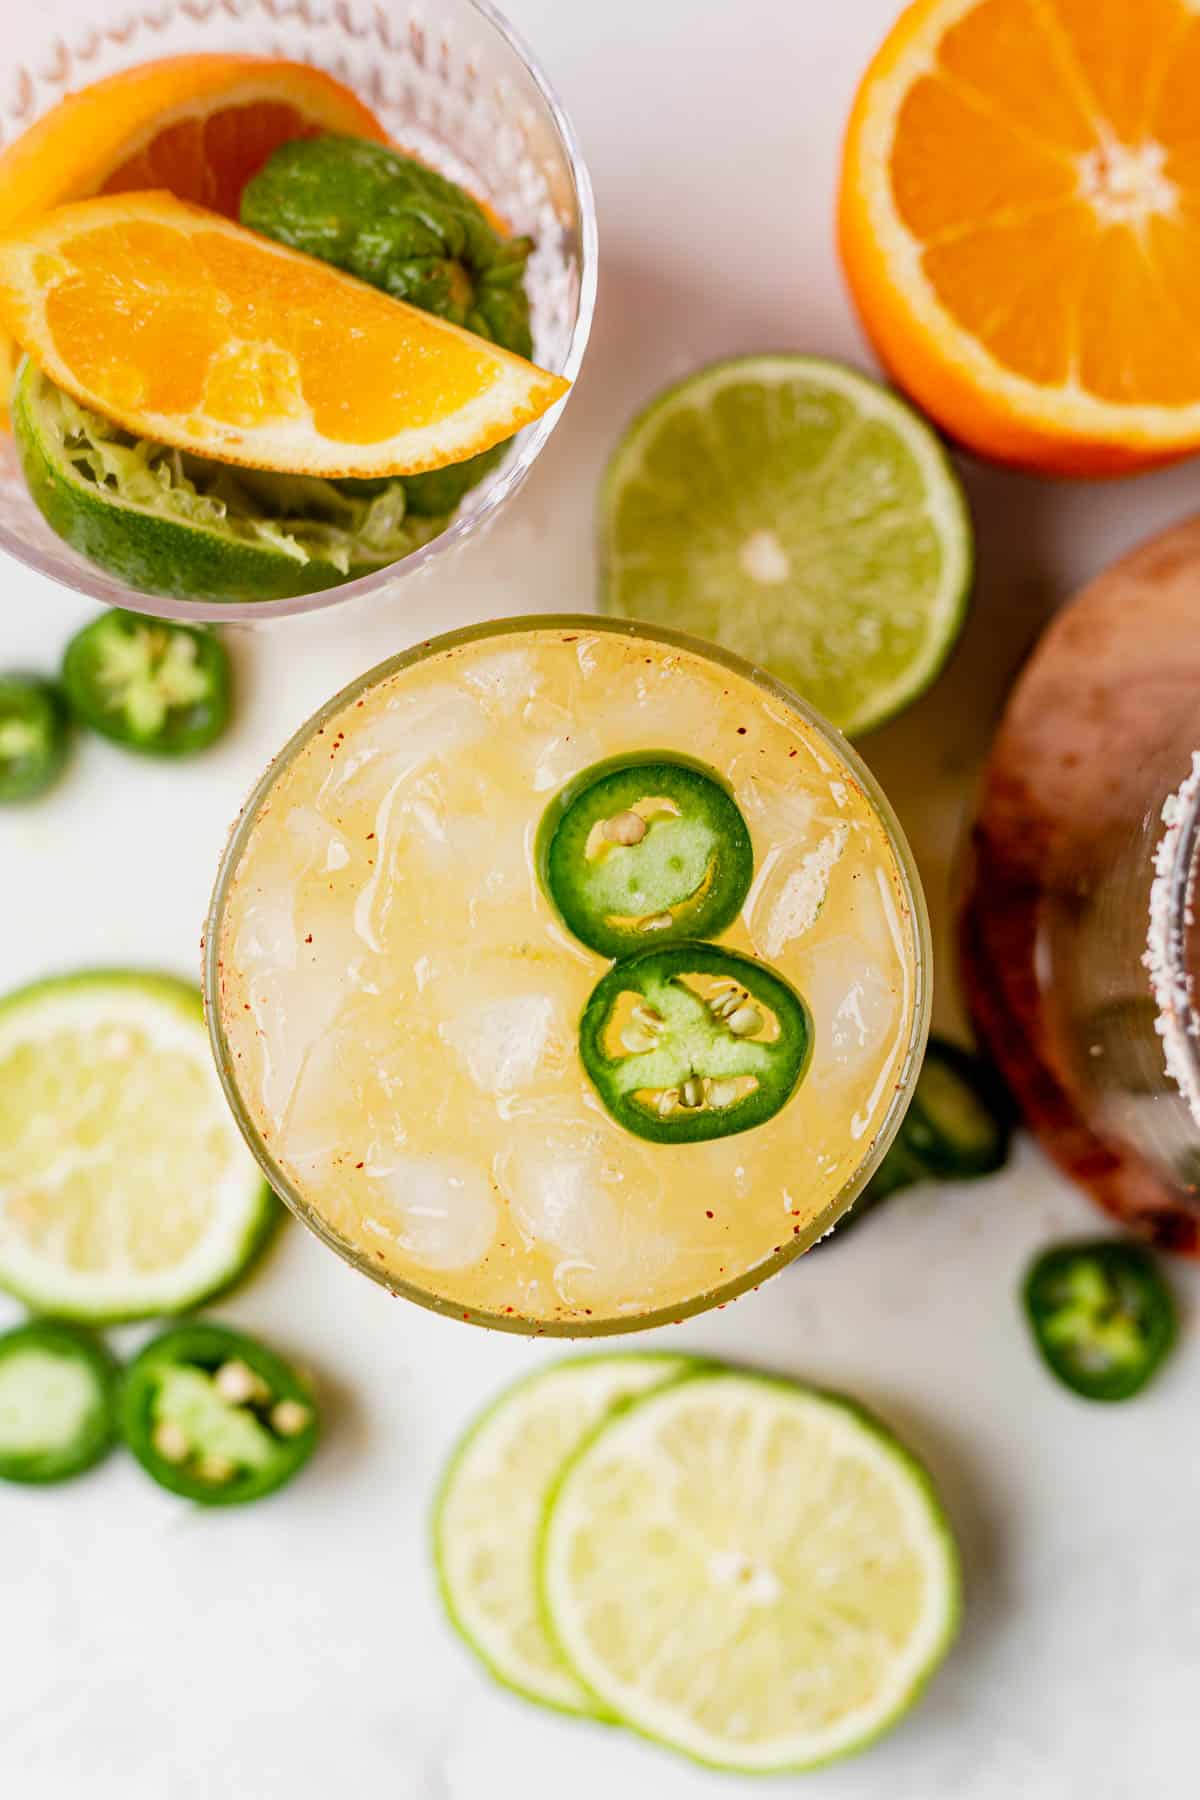 a glass full of a skinny spicy margarita with fresh limes and oranges